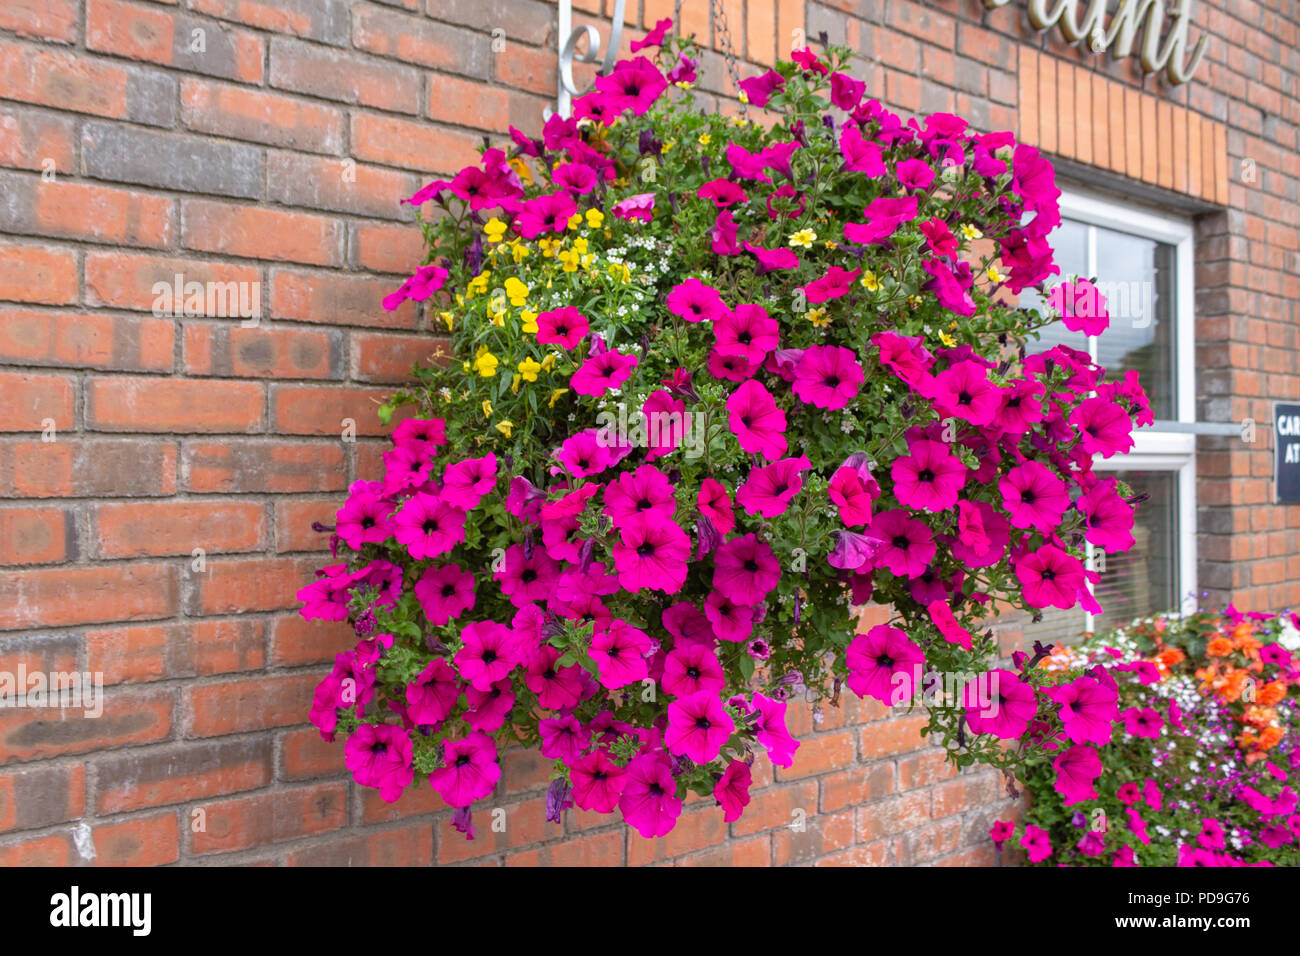 vibrant summer flowers in a hanging basket on a brick wall. Stock Photo